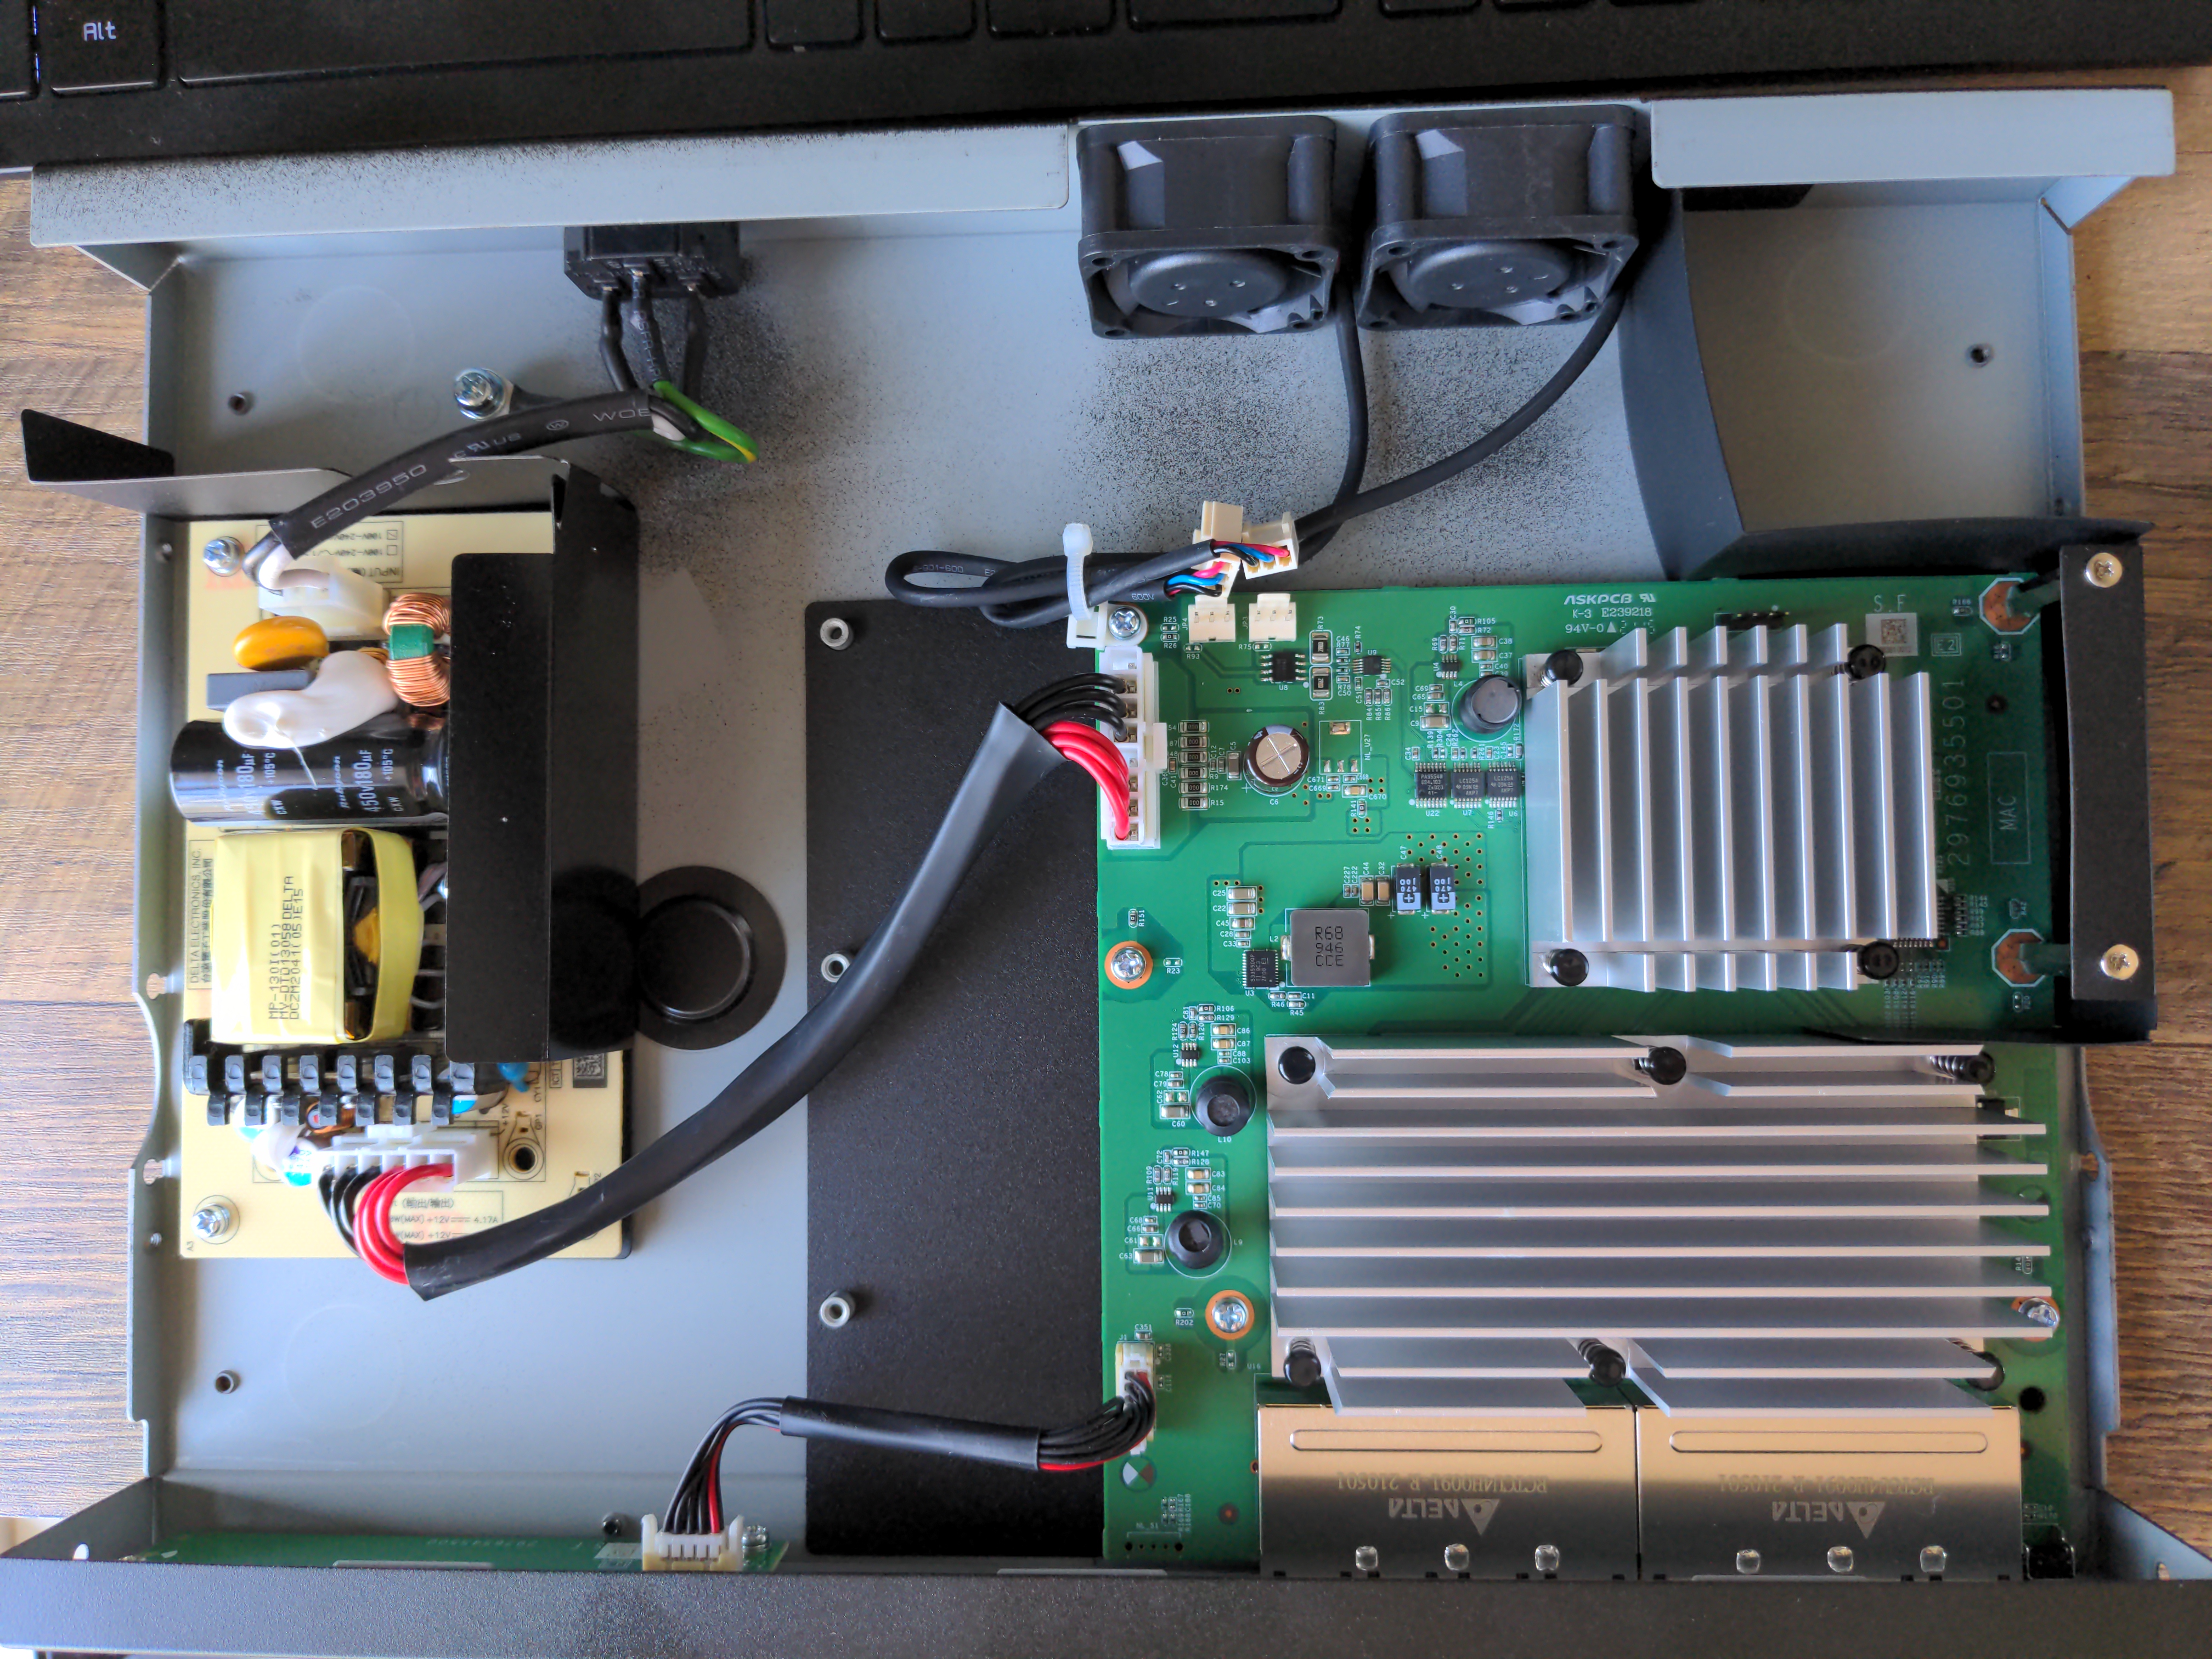 PIcture of the inside of the switch showing two small circuit boards and lots of empty space.